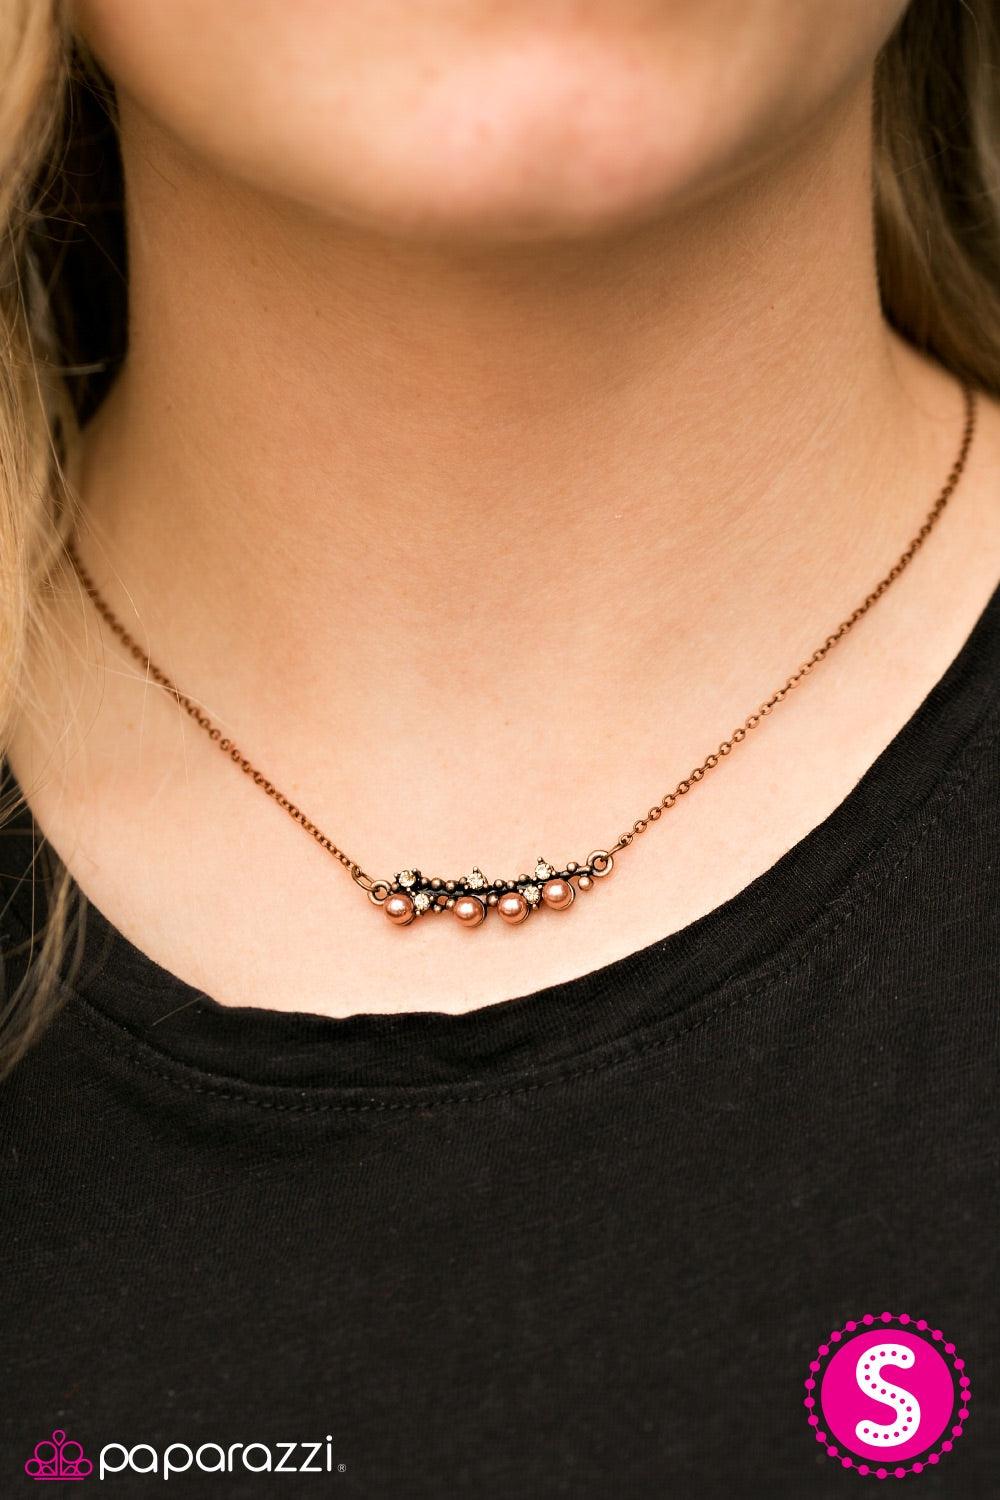 Paparazzi Accessories The Seven Year RICH - Copper Encrusted in golden topaz rhinestones and pearly copper beading, a dainty pendant copper pendant falls just below the collar in a refined fashion. Features an adjustable clasp closure. Jewelry